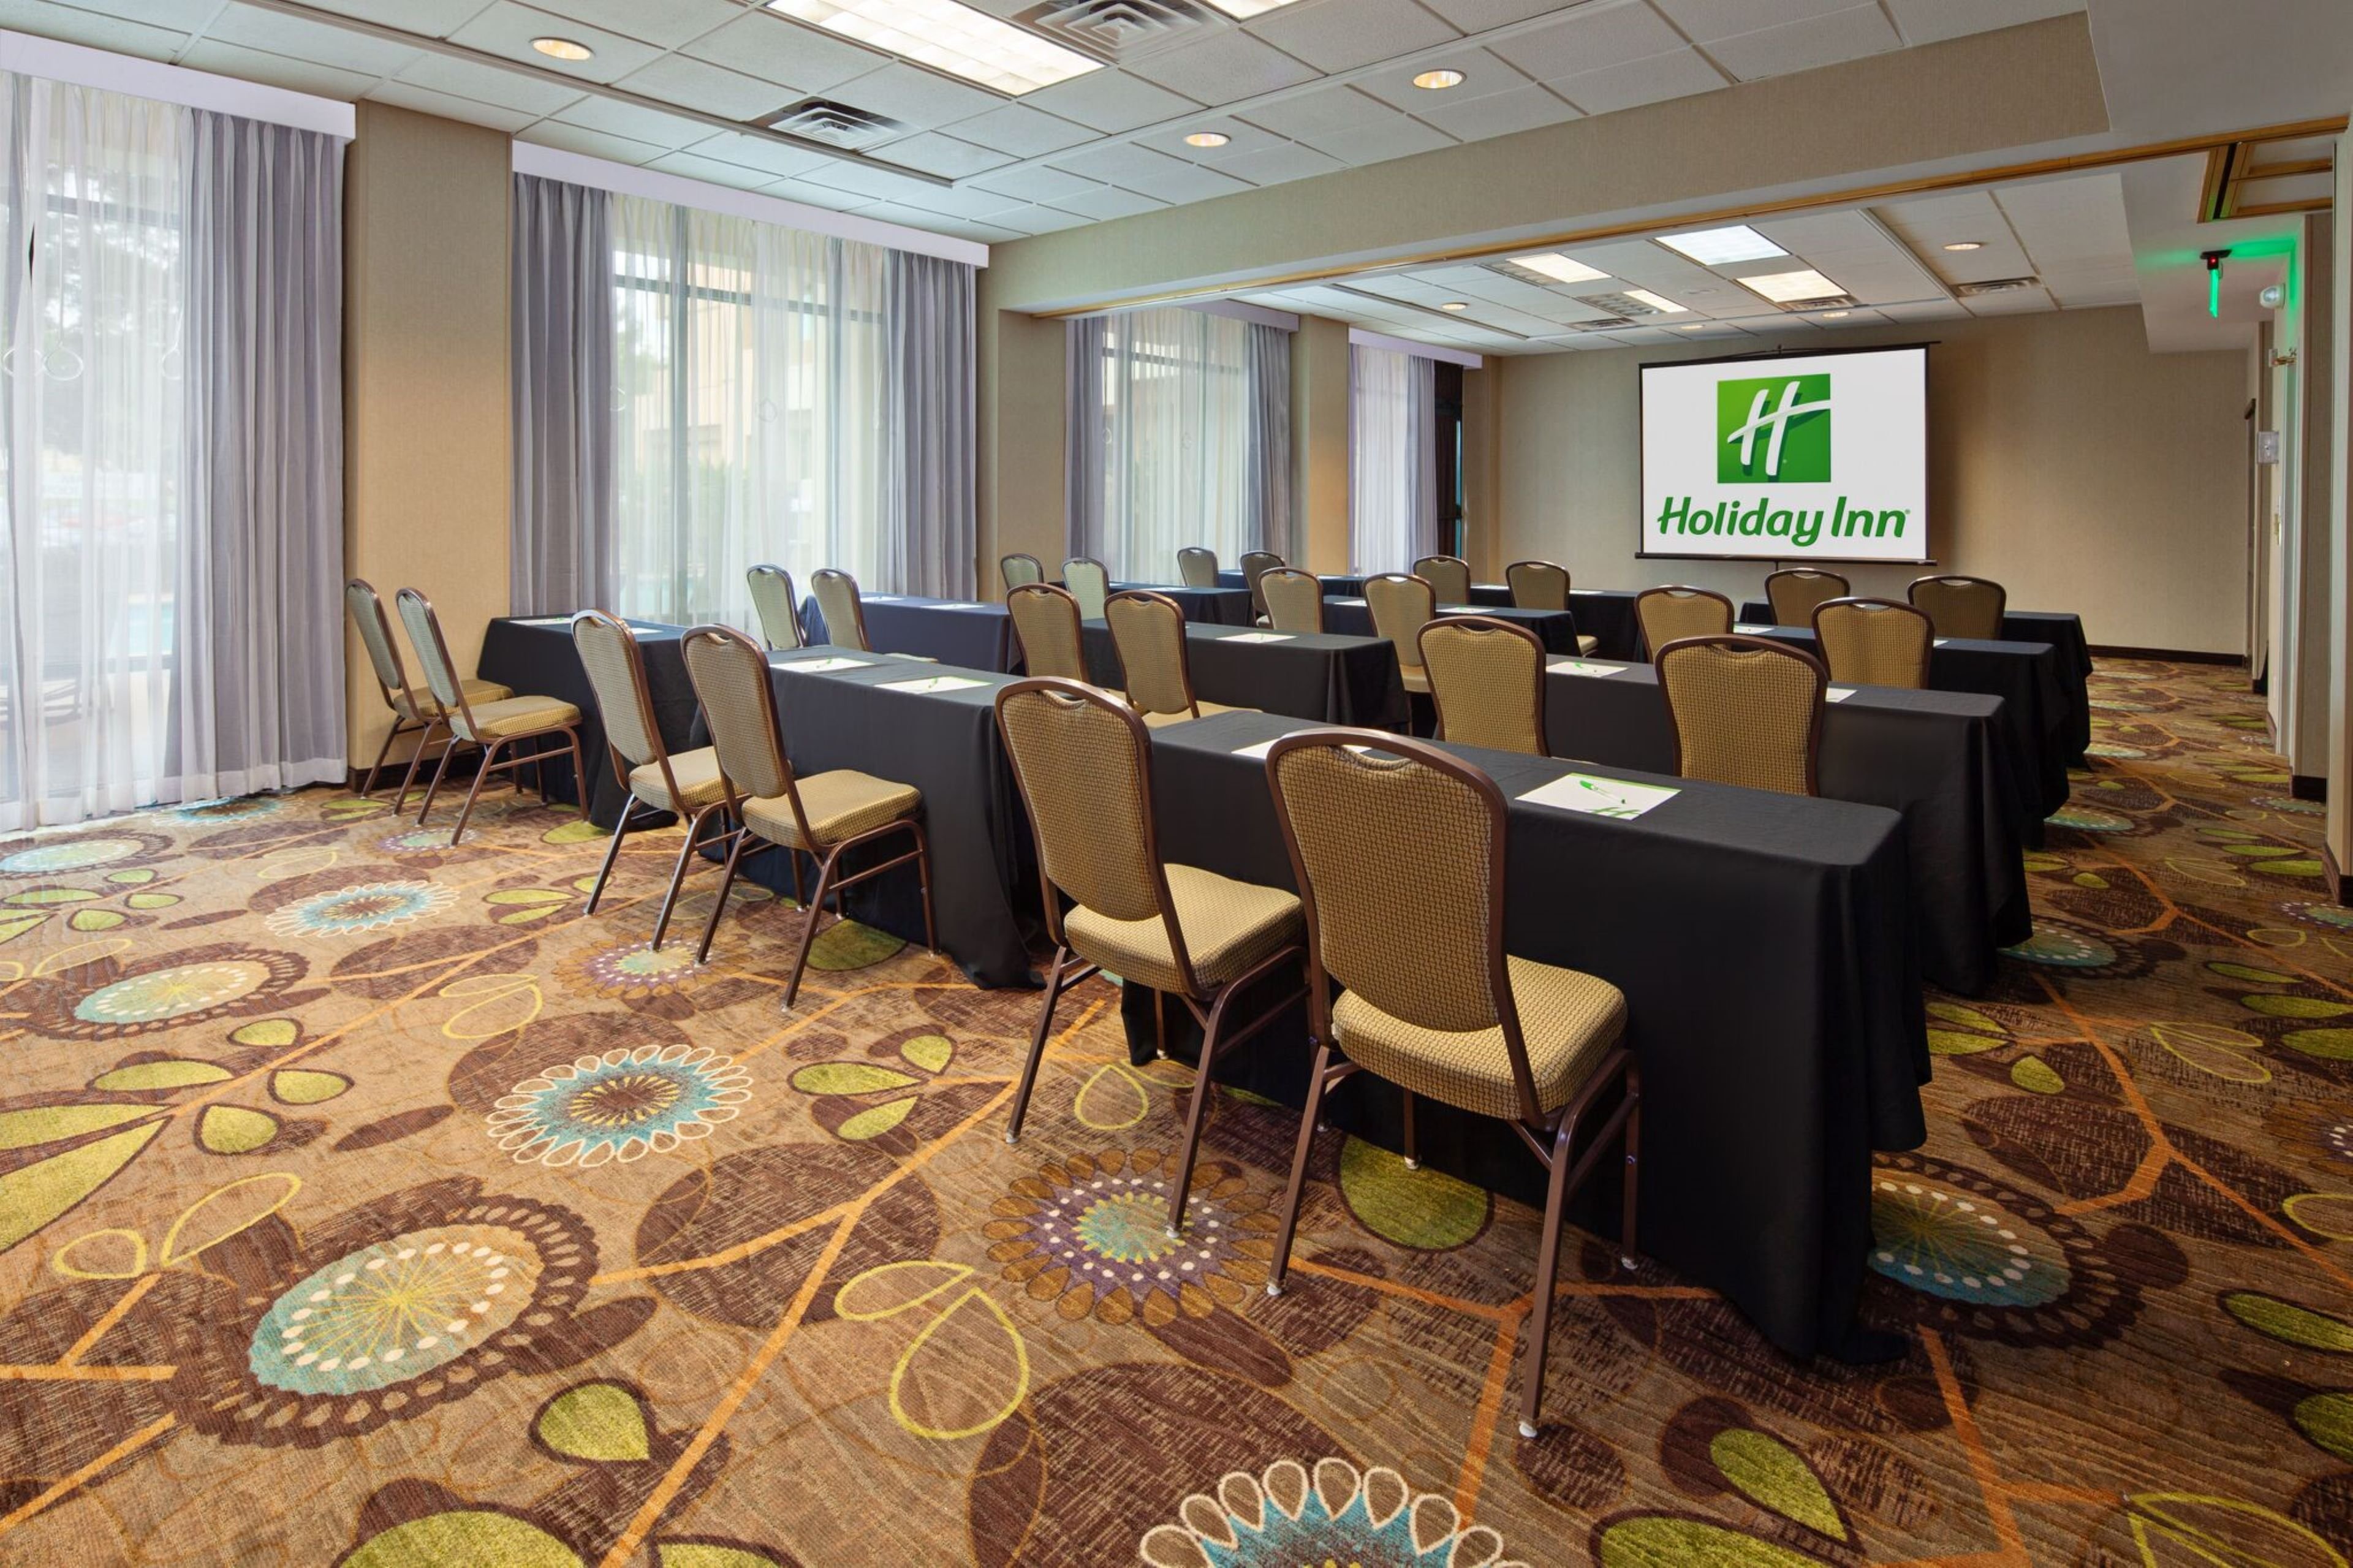 Host your next meeting in Palmdale at Holiday Inn.